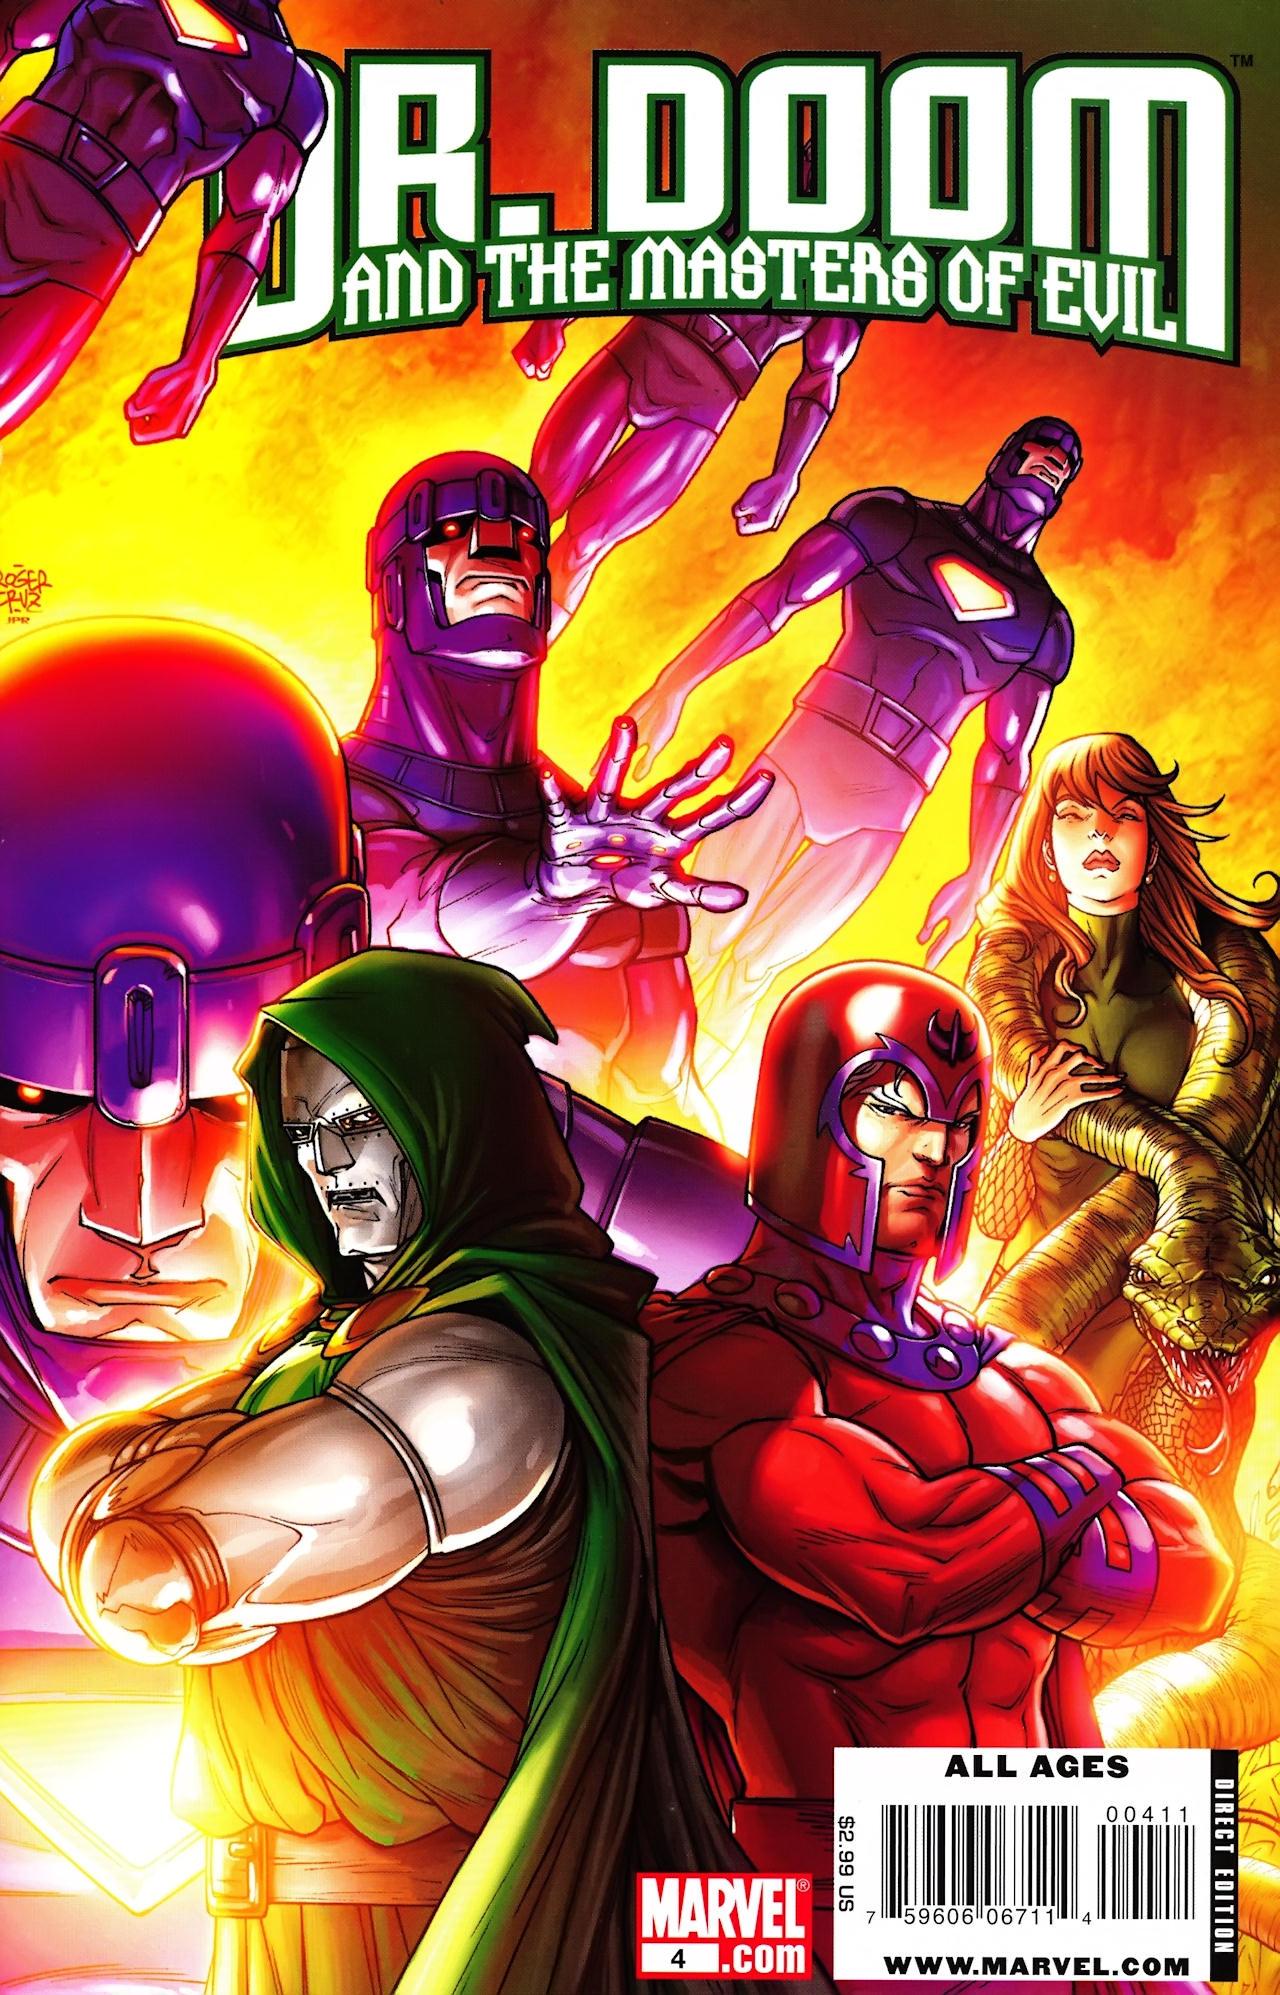 Doctor Doom and the Masters of Evil Vol. 1 #4